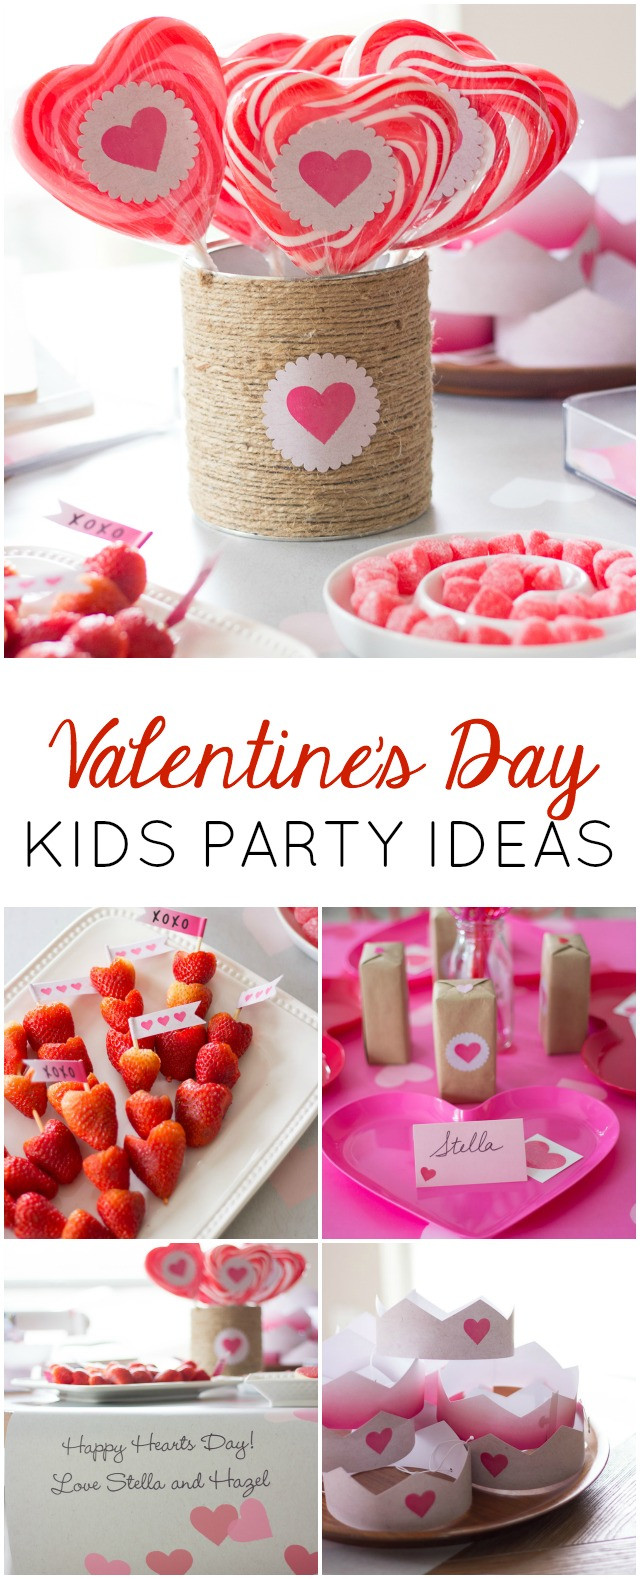 Valentine Birthday Party Ideas
 A Heart Filled Valentines Party